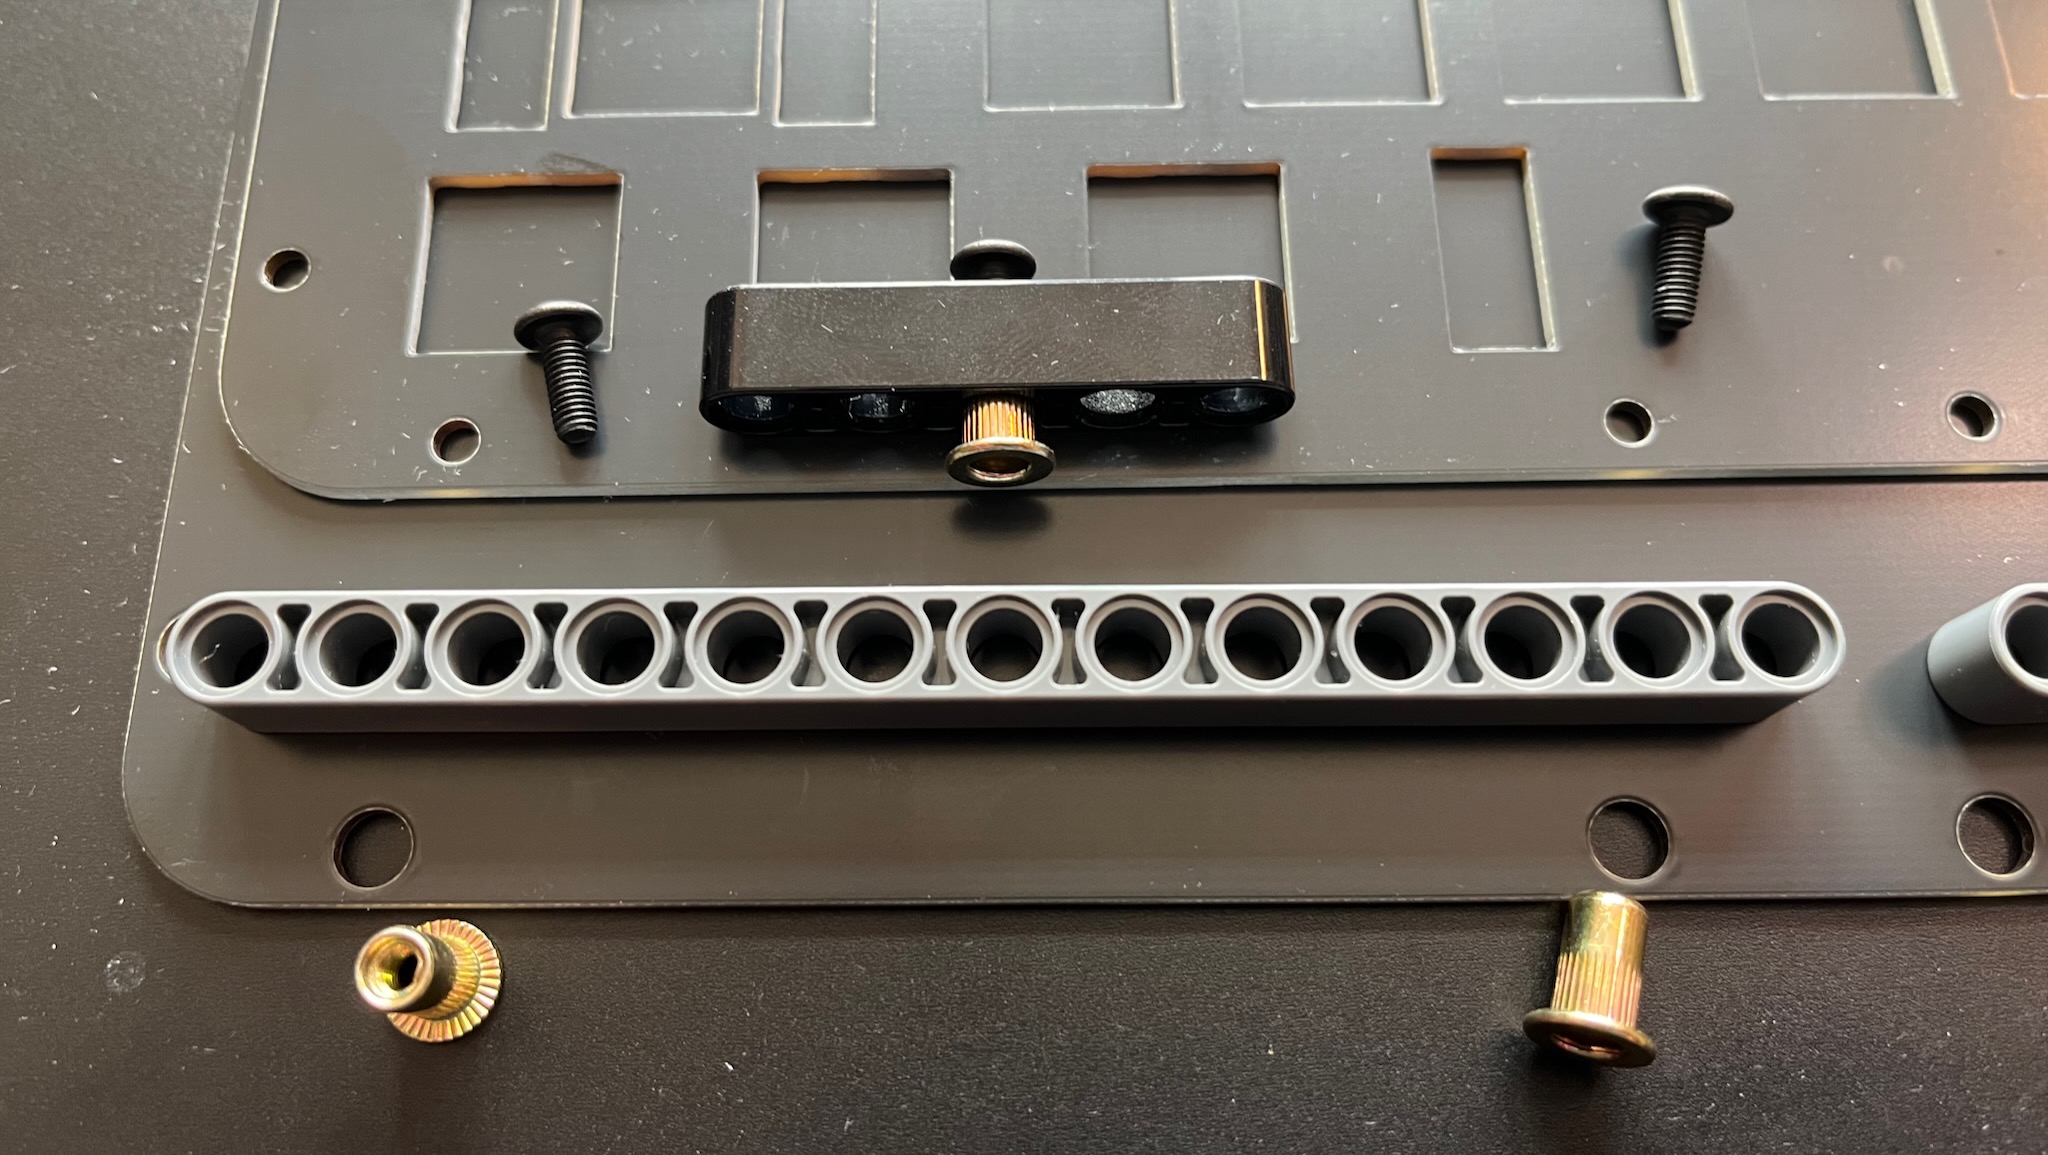 un-assembled parts of keybird69: a black switch mounting plate on top of a black base plate, with a lego beam and some screws and rivet nuts placed to show how they will fit together